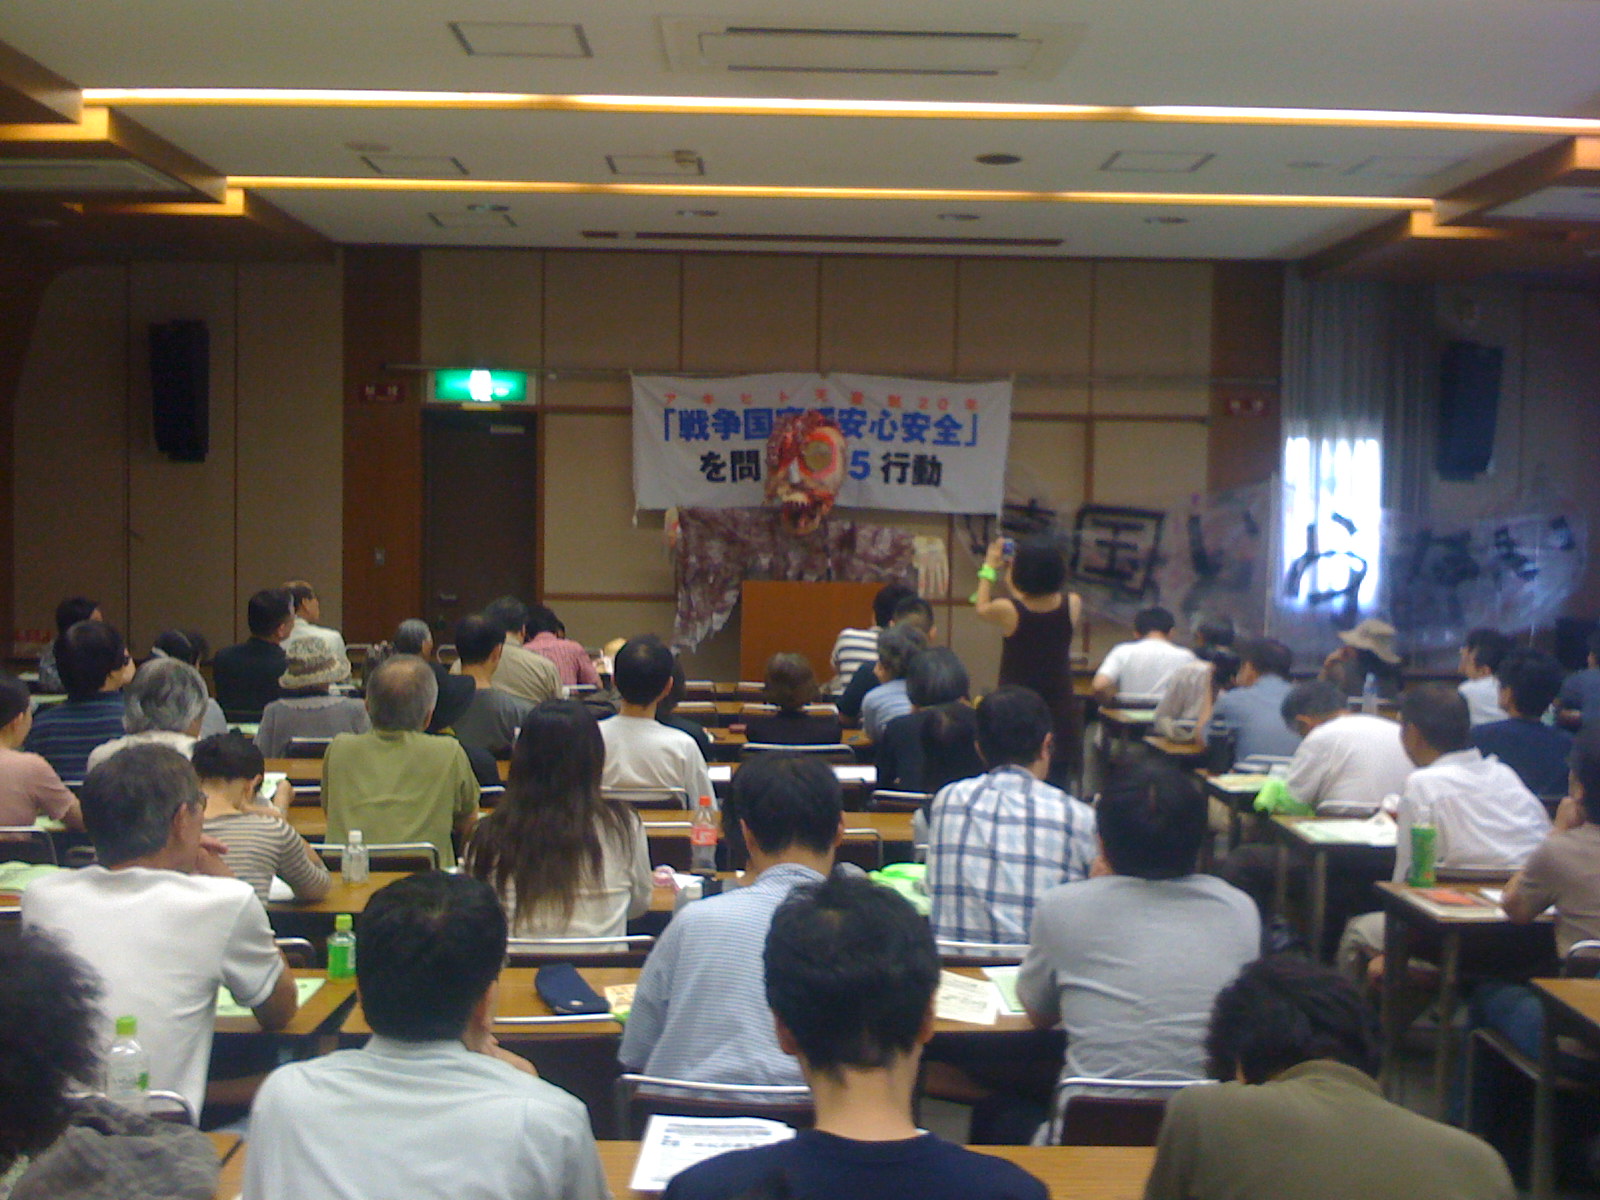 Photo of a speech using a giant puppet which was also used to protest with.